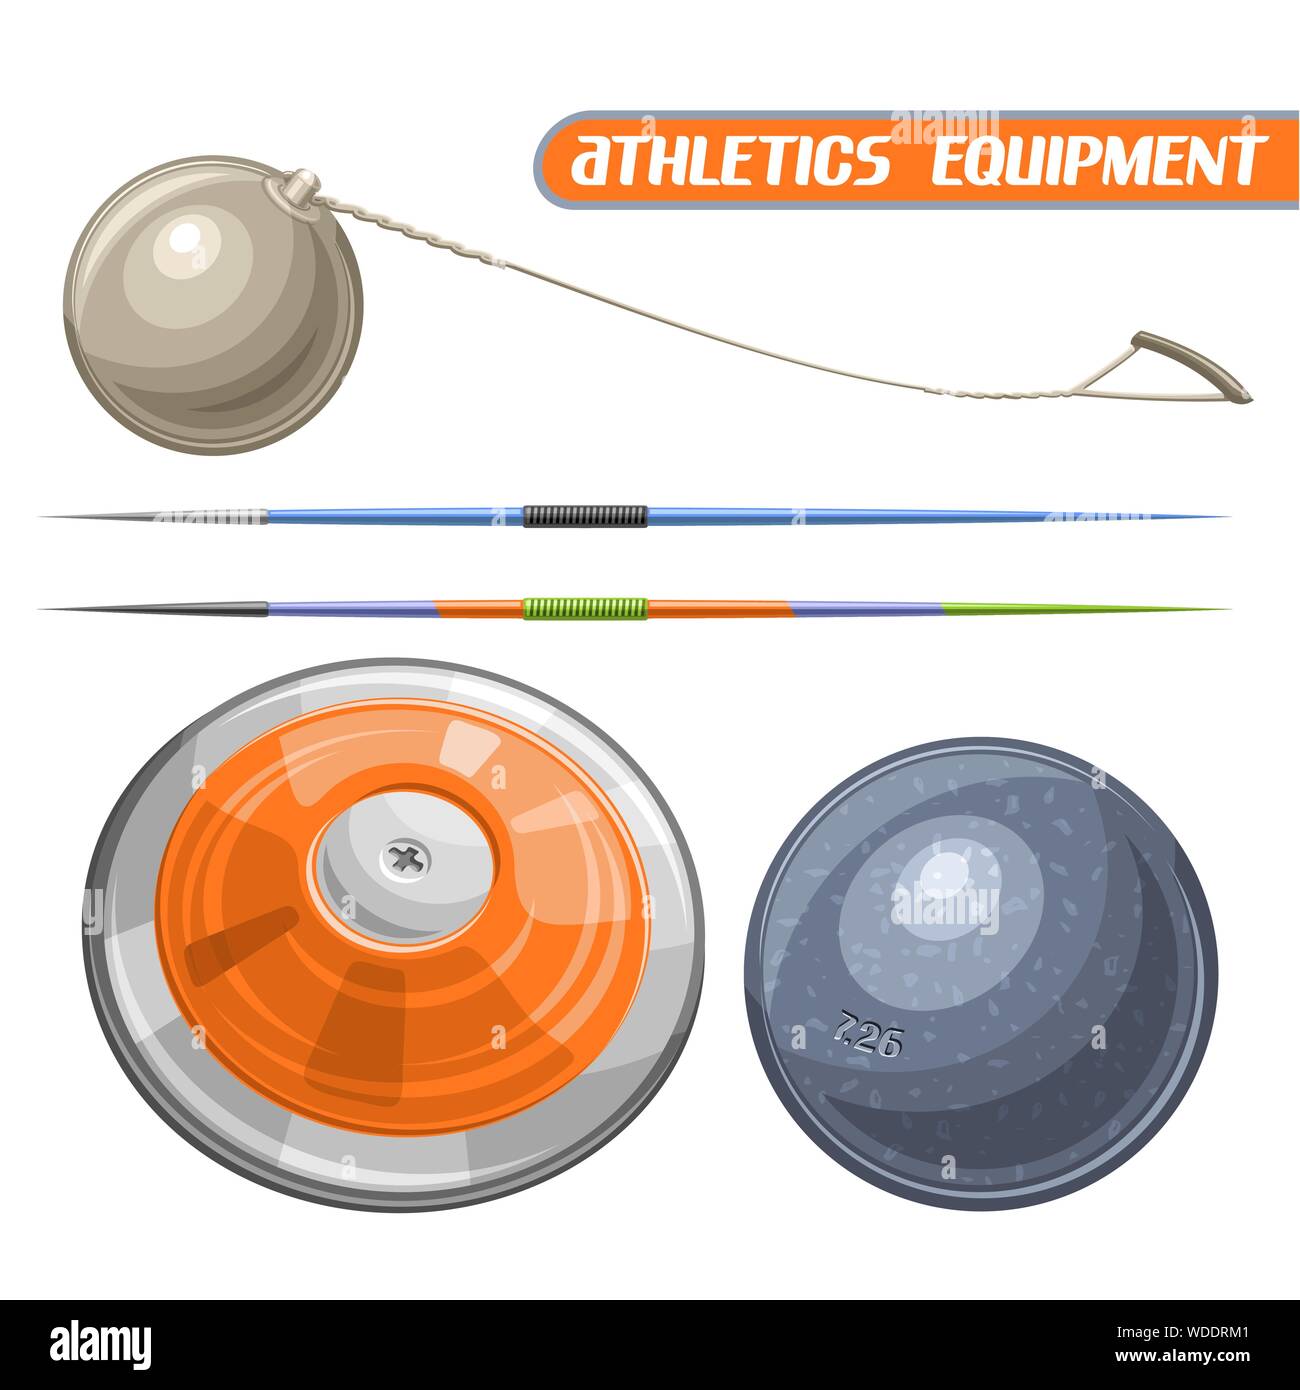 Vector icons for athletics equipment, consisting of abstract metal discus throw, shot put, throwing hammer, javelin. Track and field equipment for atl Stock Vector